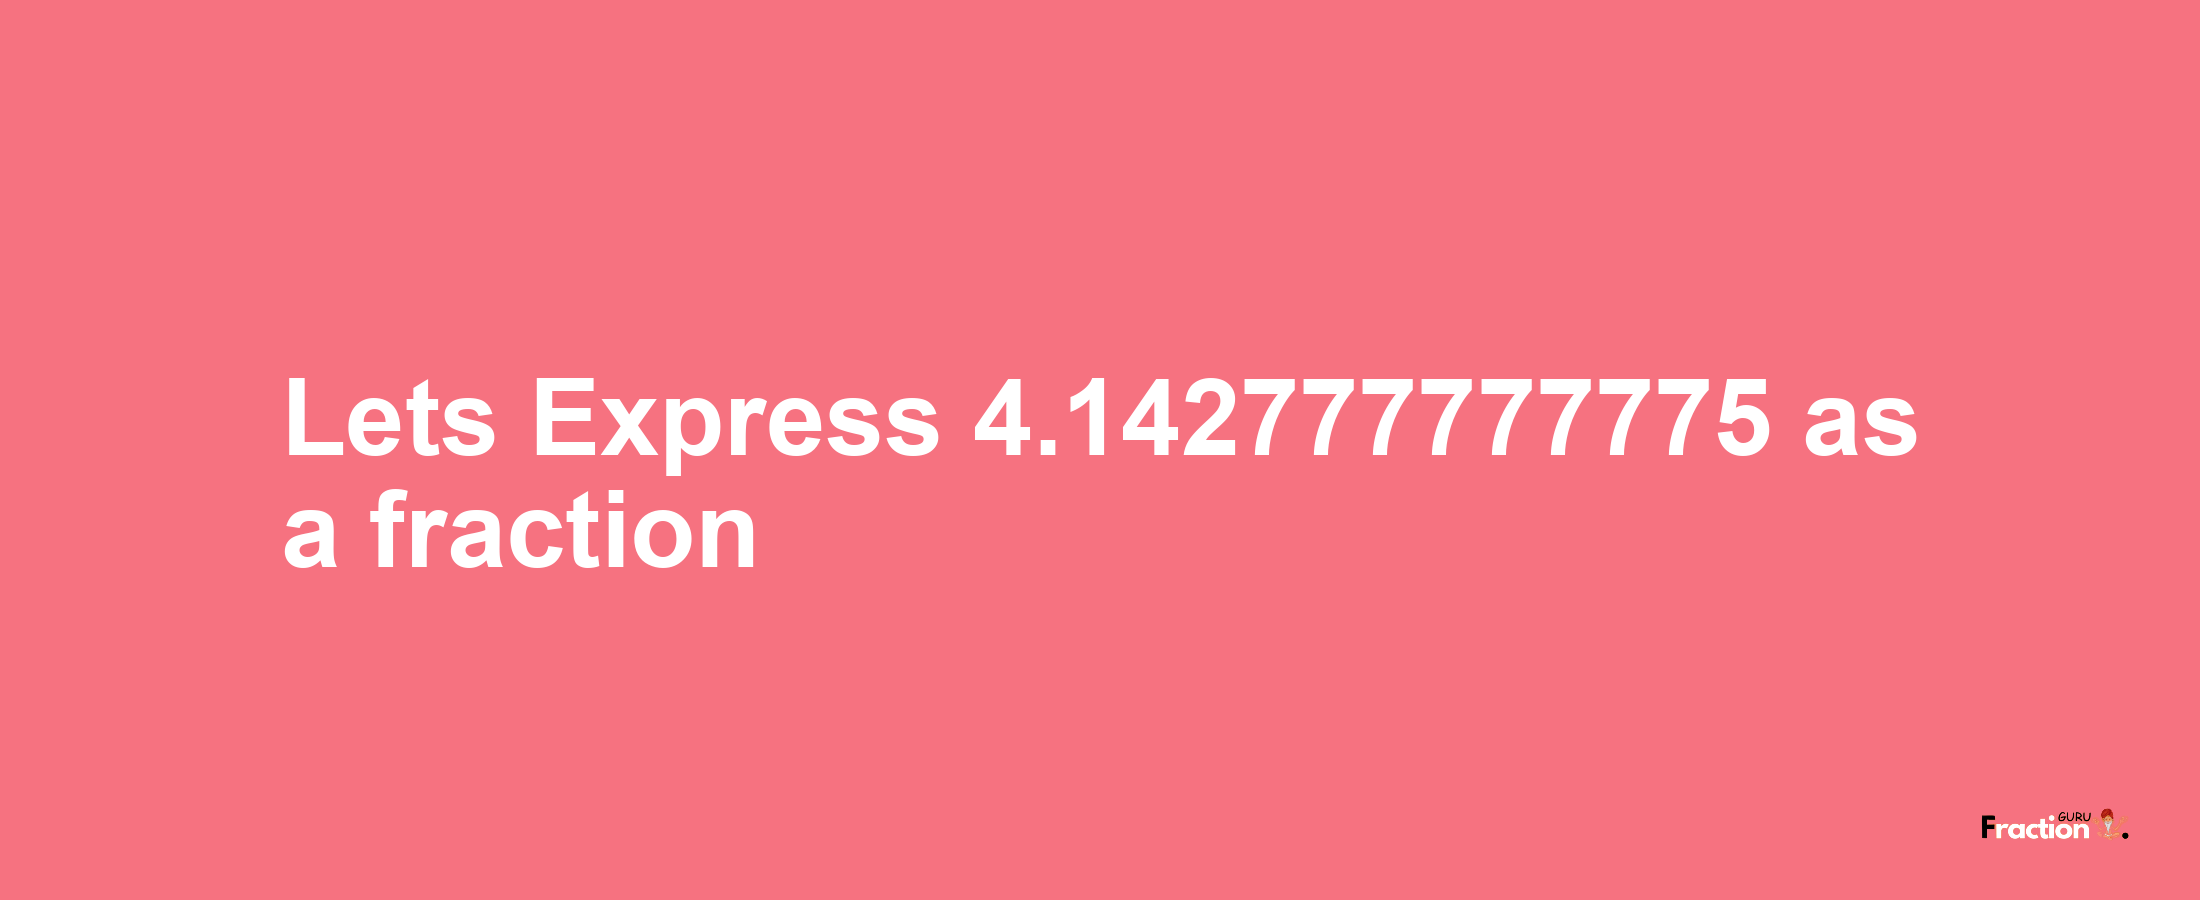 Lets Express 4.142777777775 as afraction